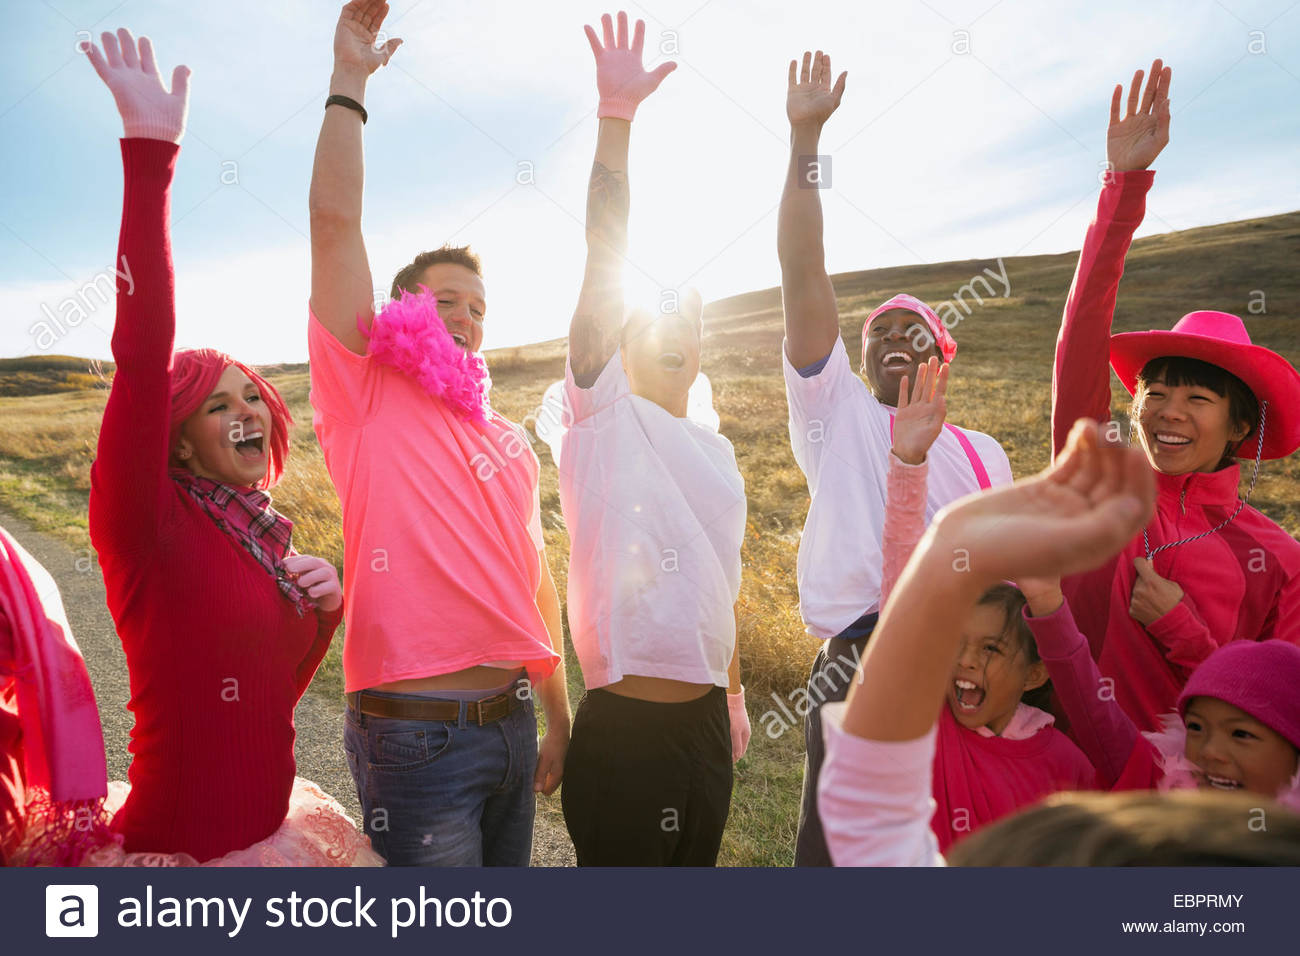 Group in pink cheering at charity race Stock Photo